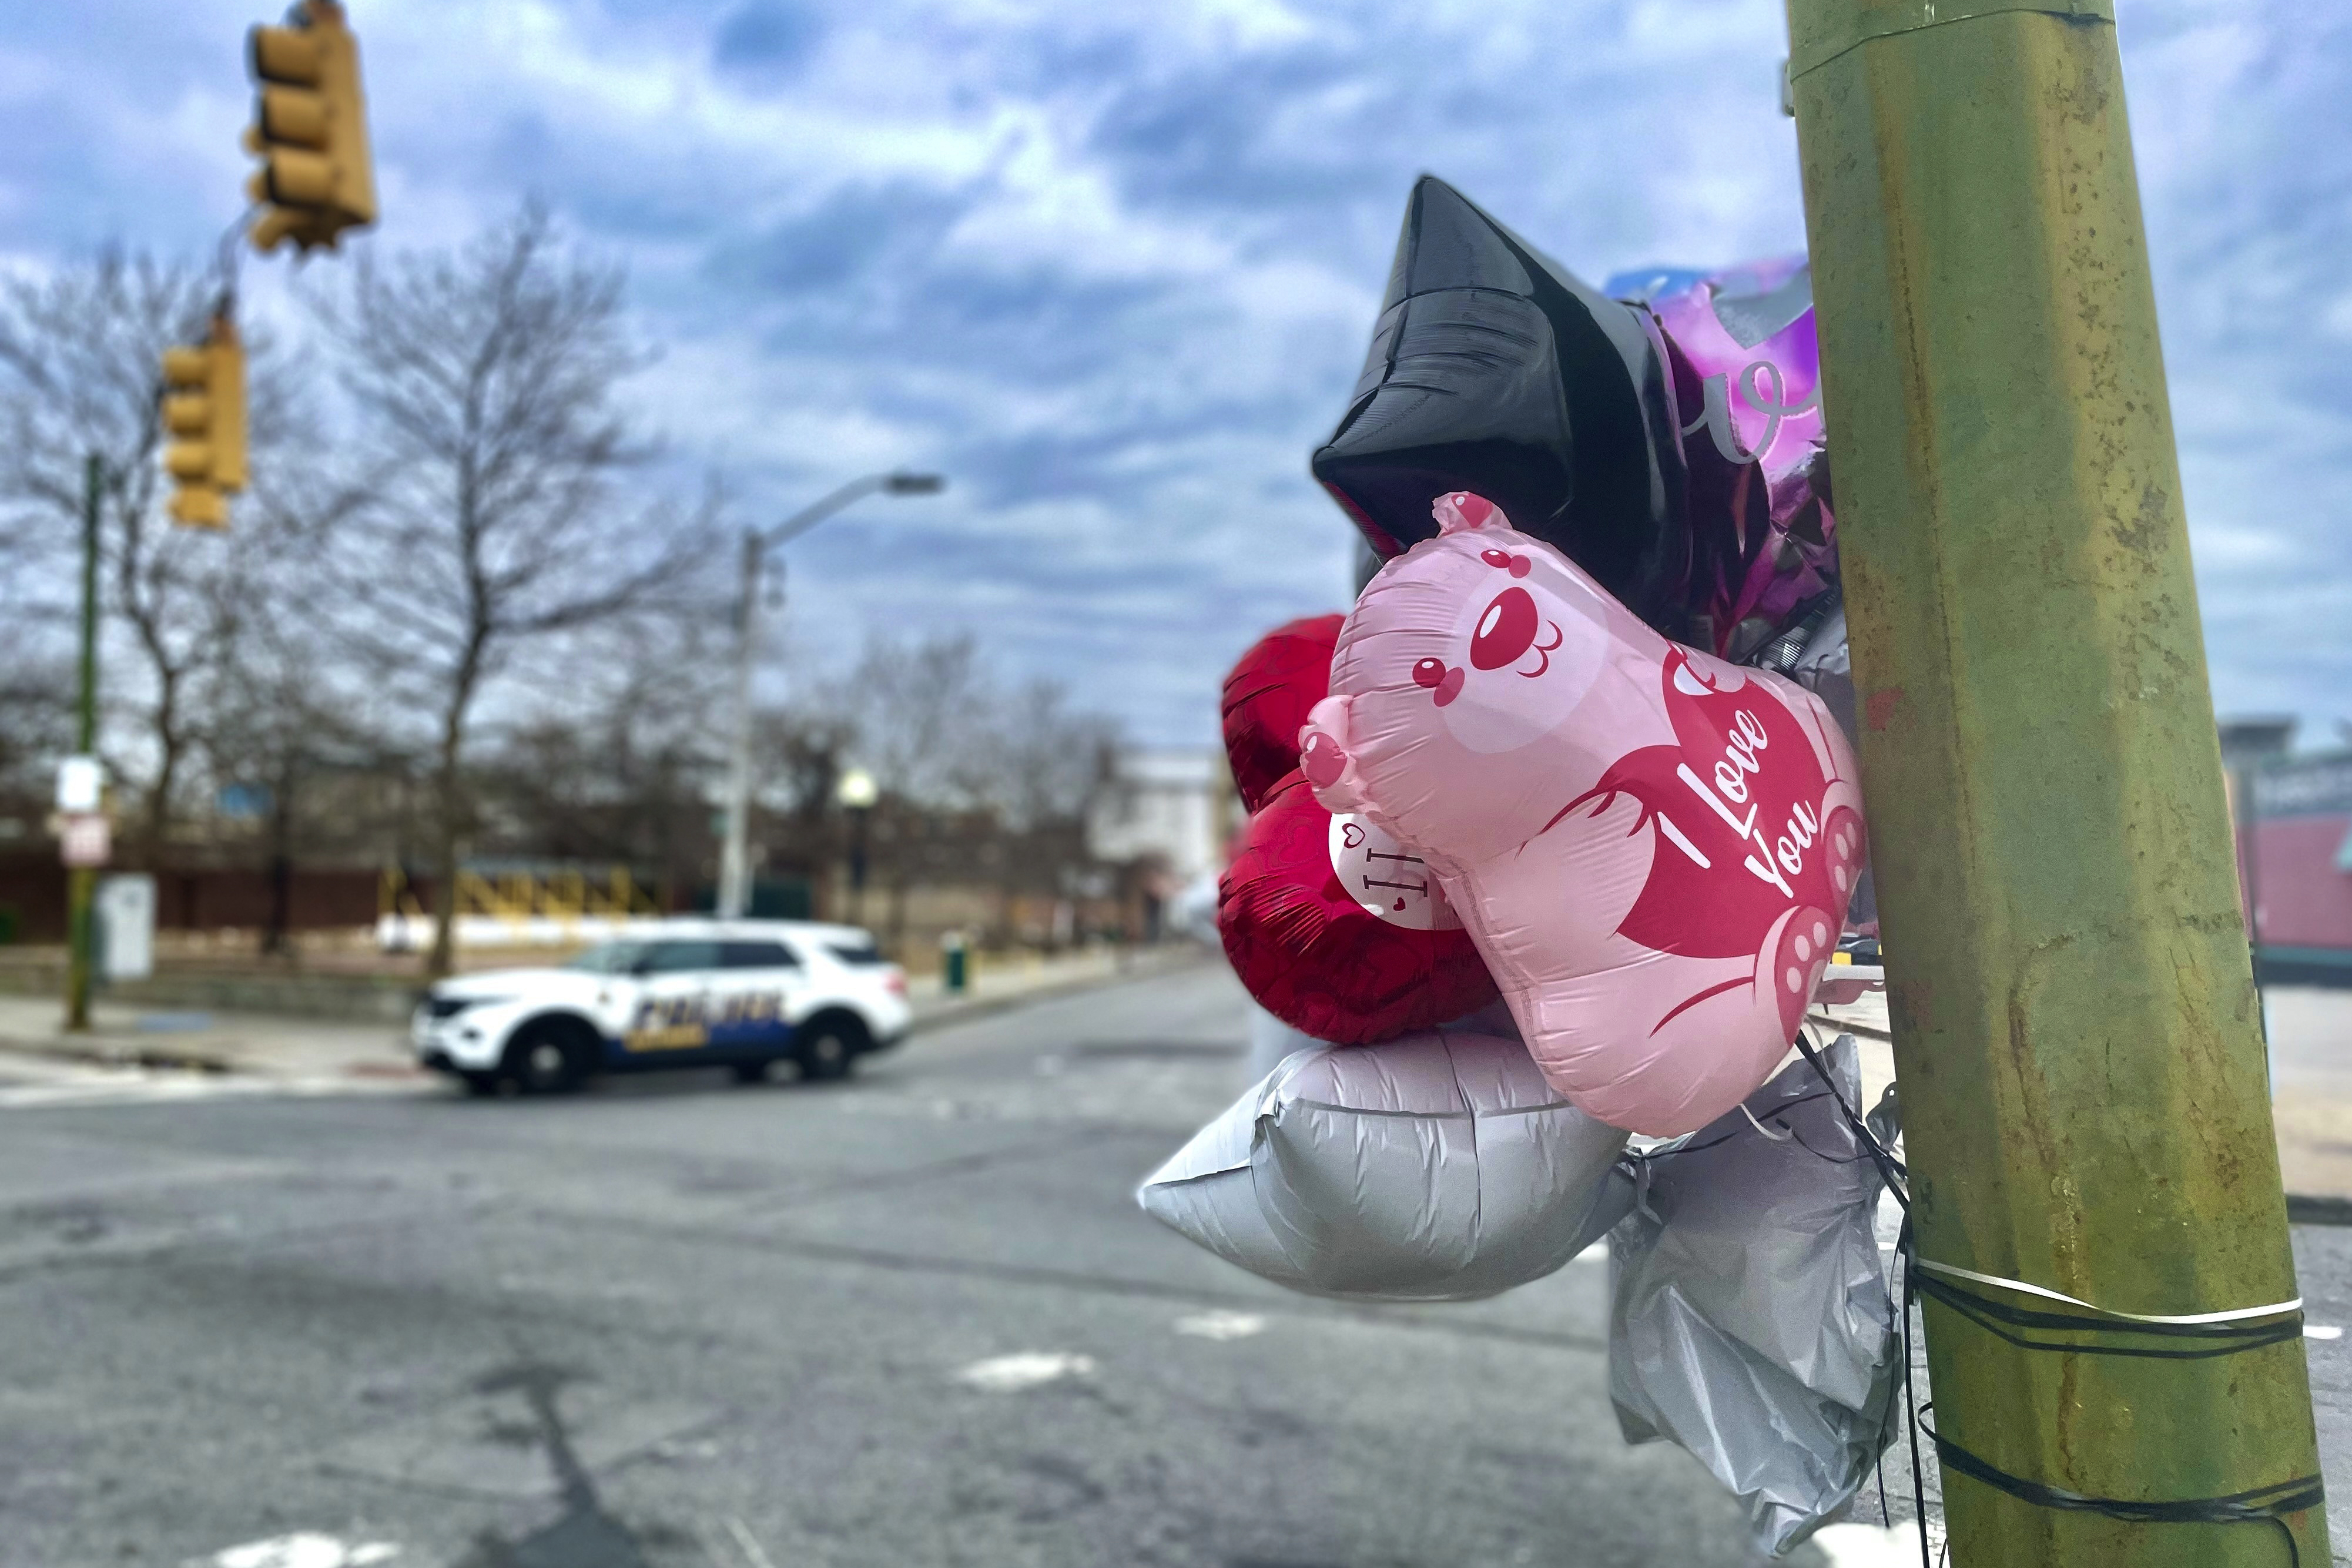 Baltimore's homicide count hits a 9-year low. Mayor Scott shares what's behind the drop.